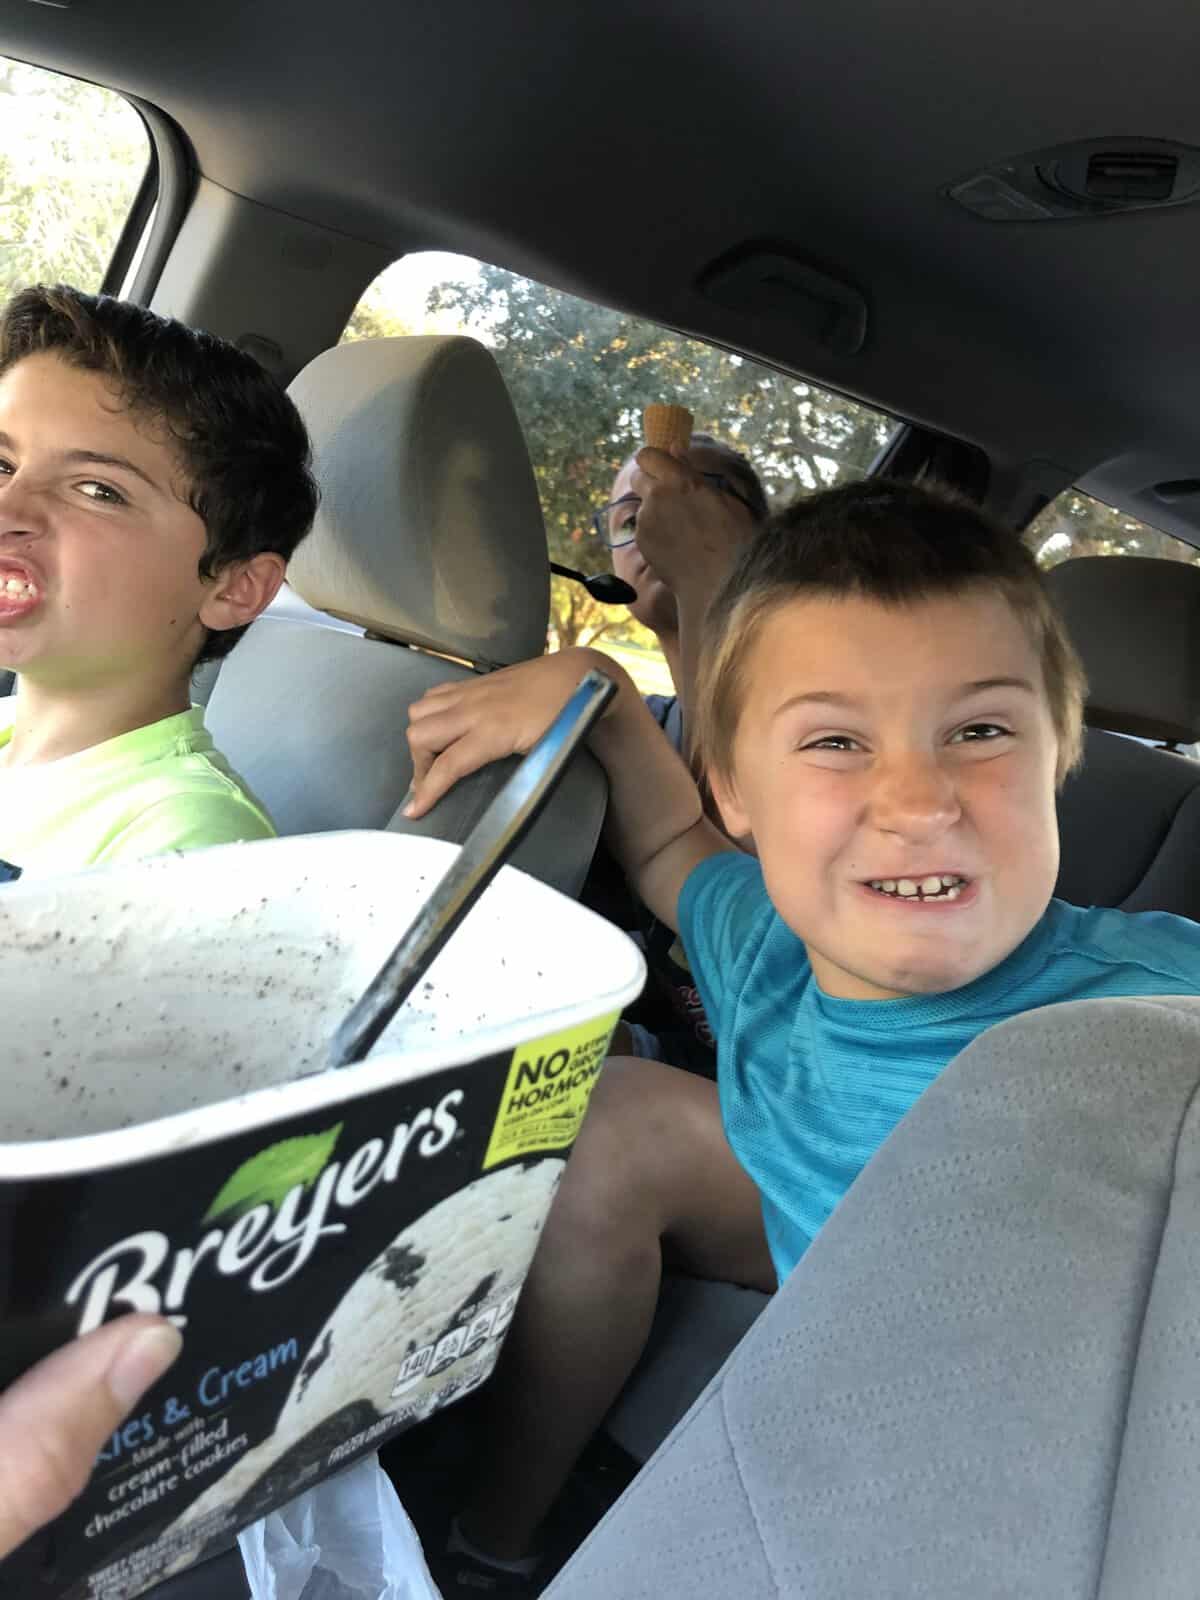 eating ice cream in the car, everyone happy.